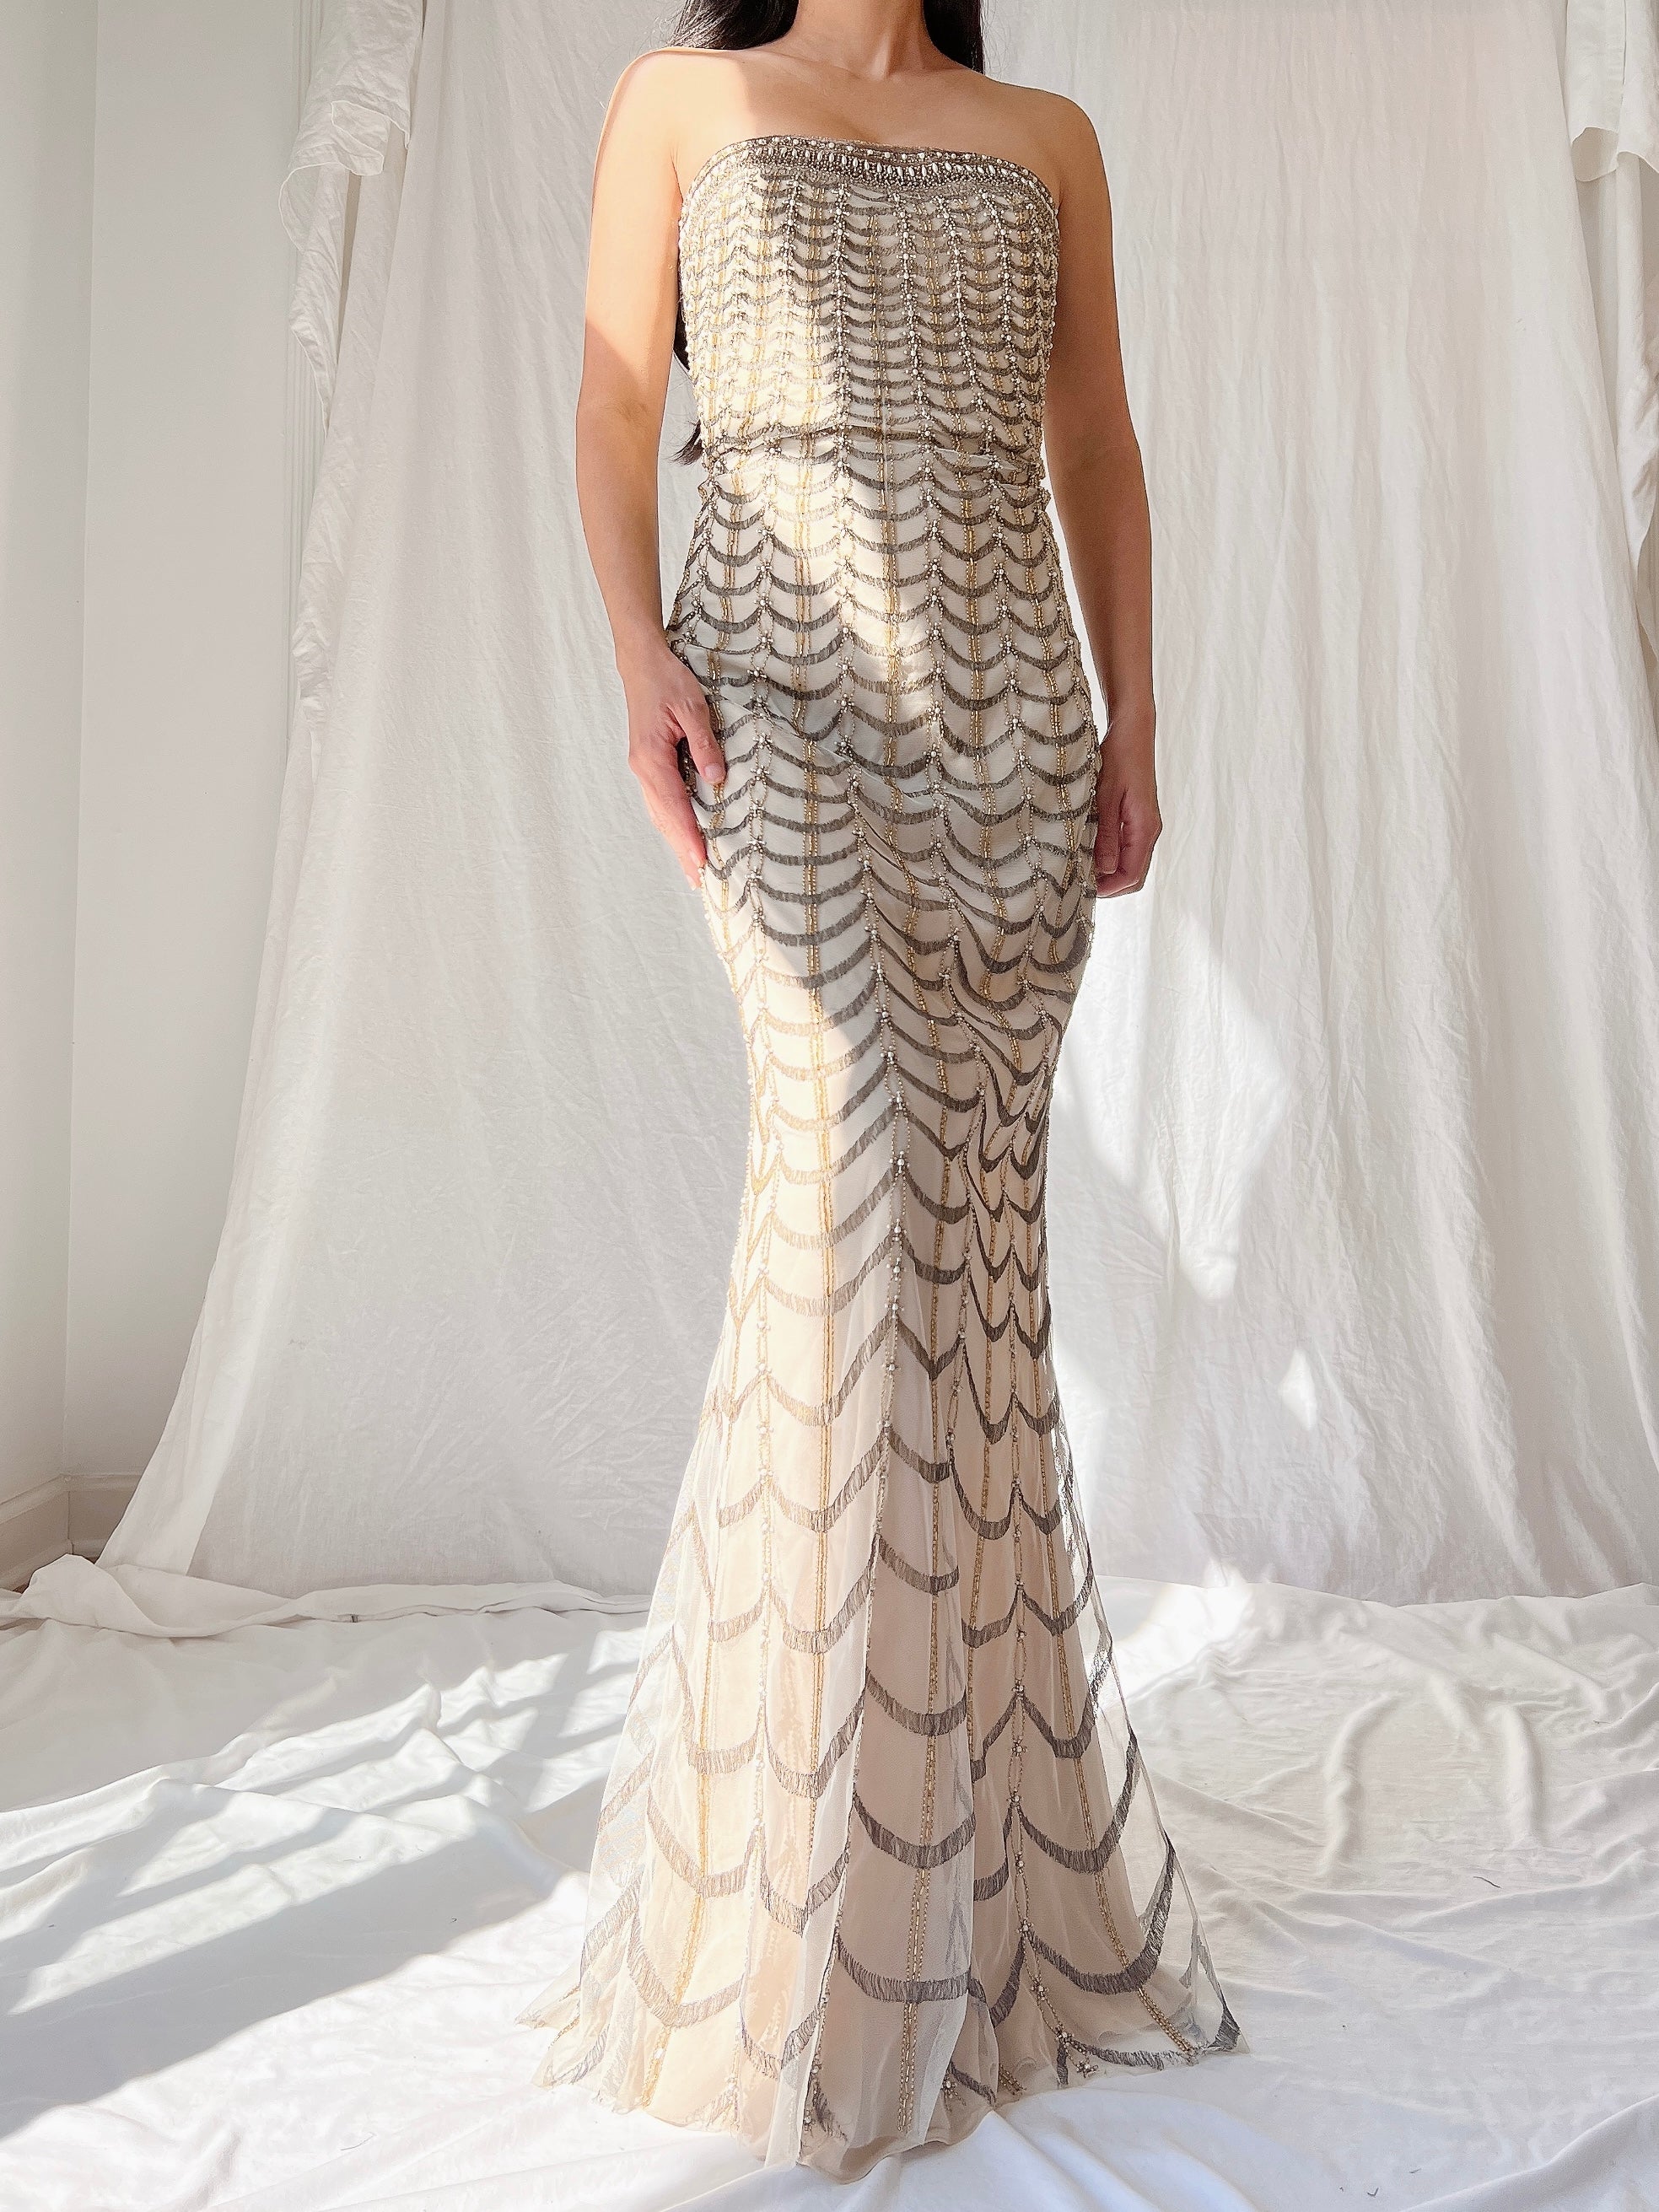 Reem Acra Metallic Embroidered Gown - M